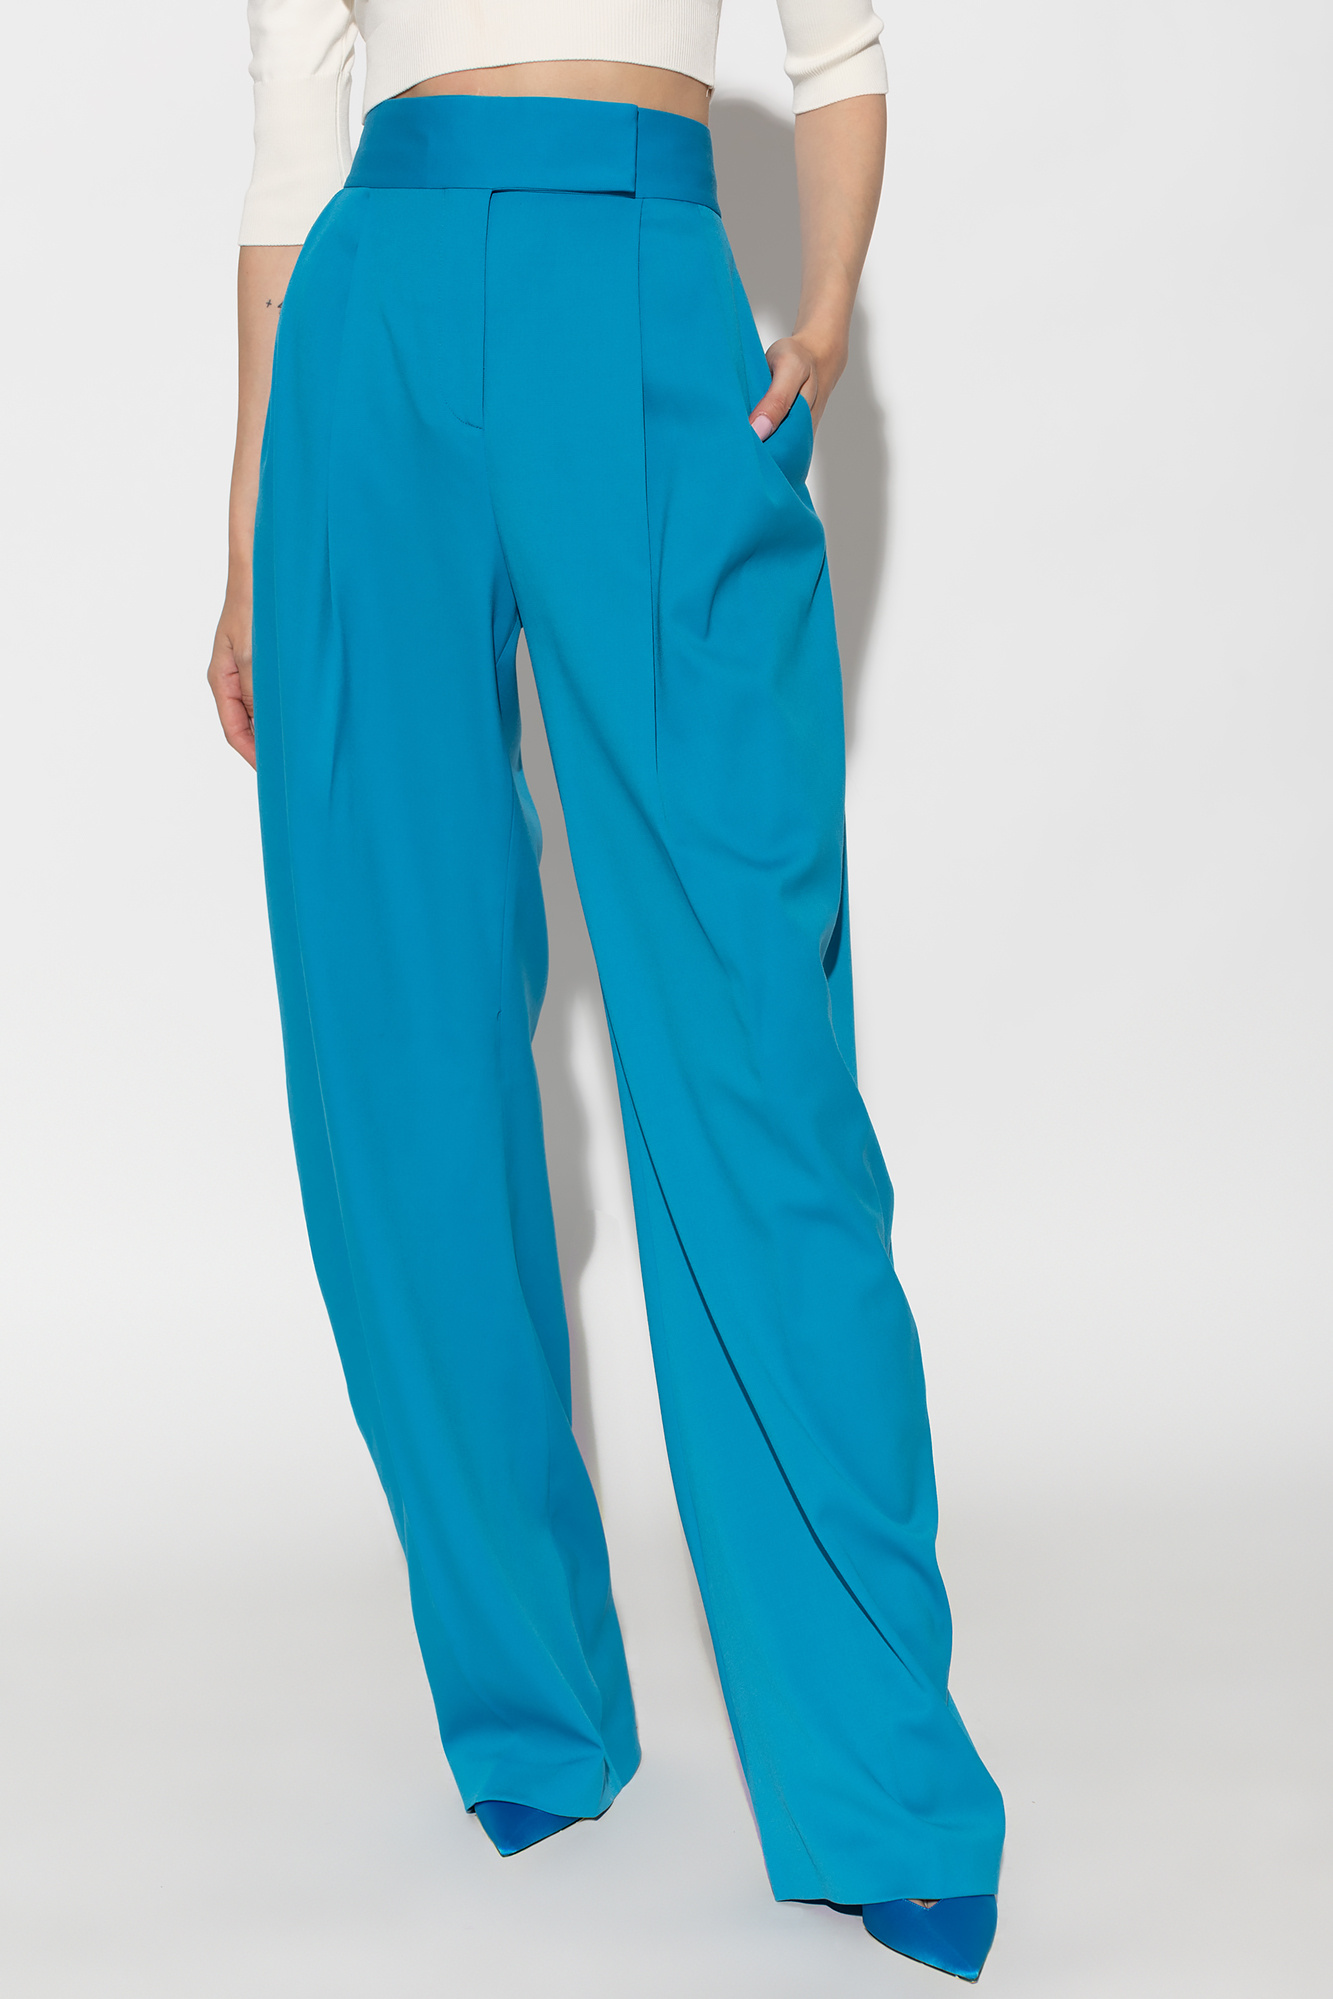 The Attico ‘Gary’ pleat-front trousers